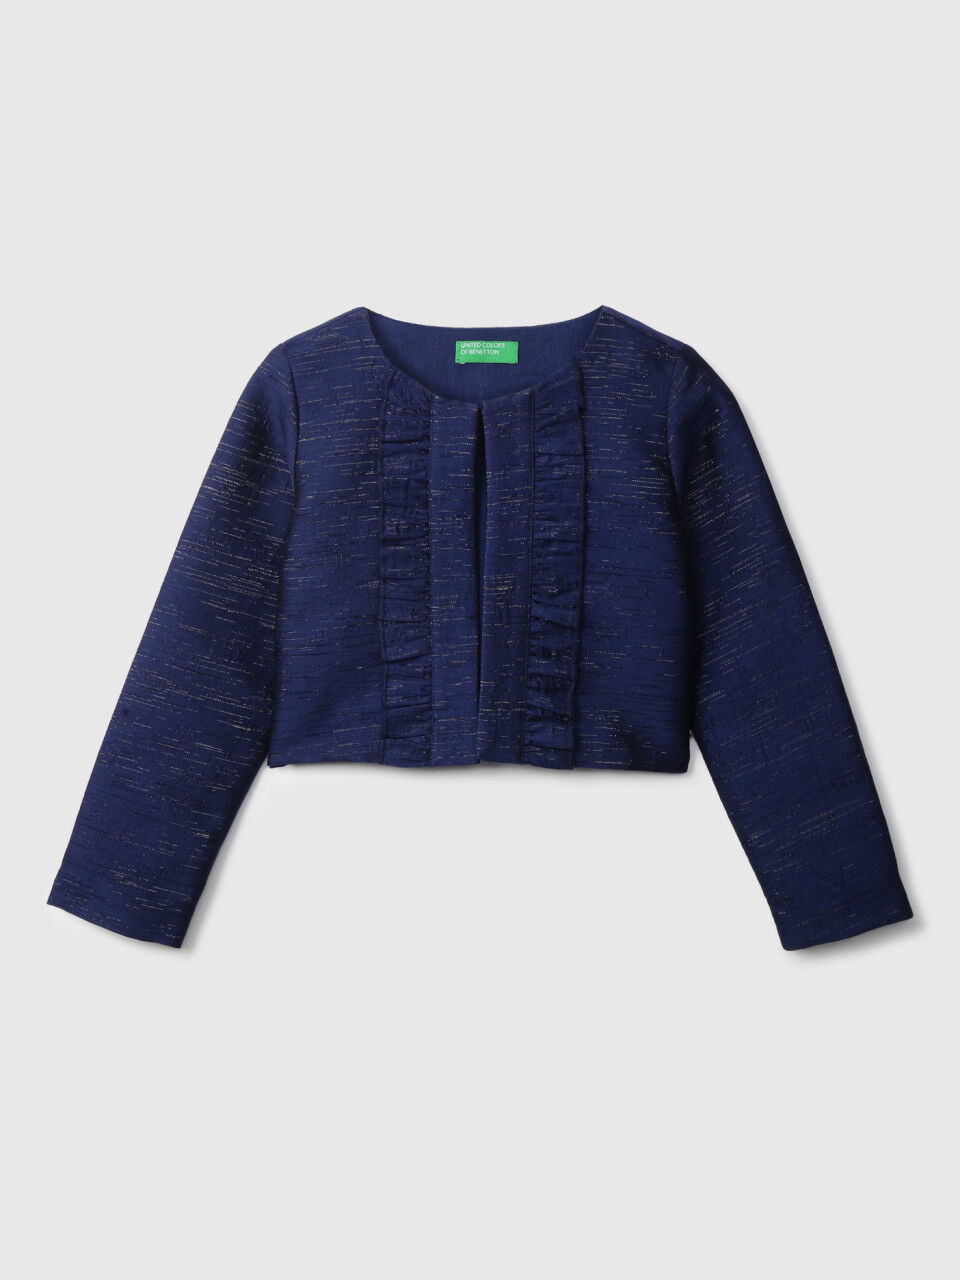 United Colors Of Benetton Girls Navy Long Sleeve Frill Jacket